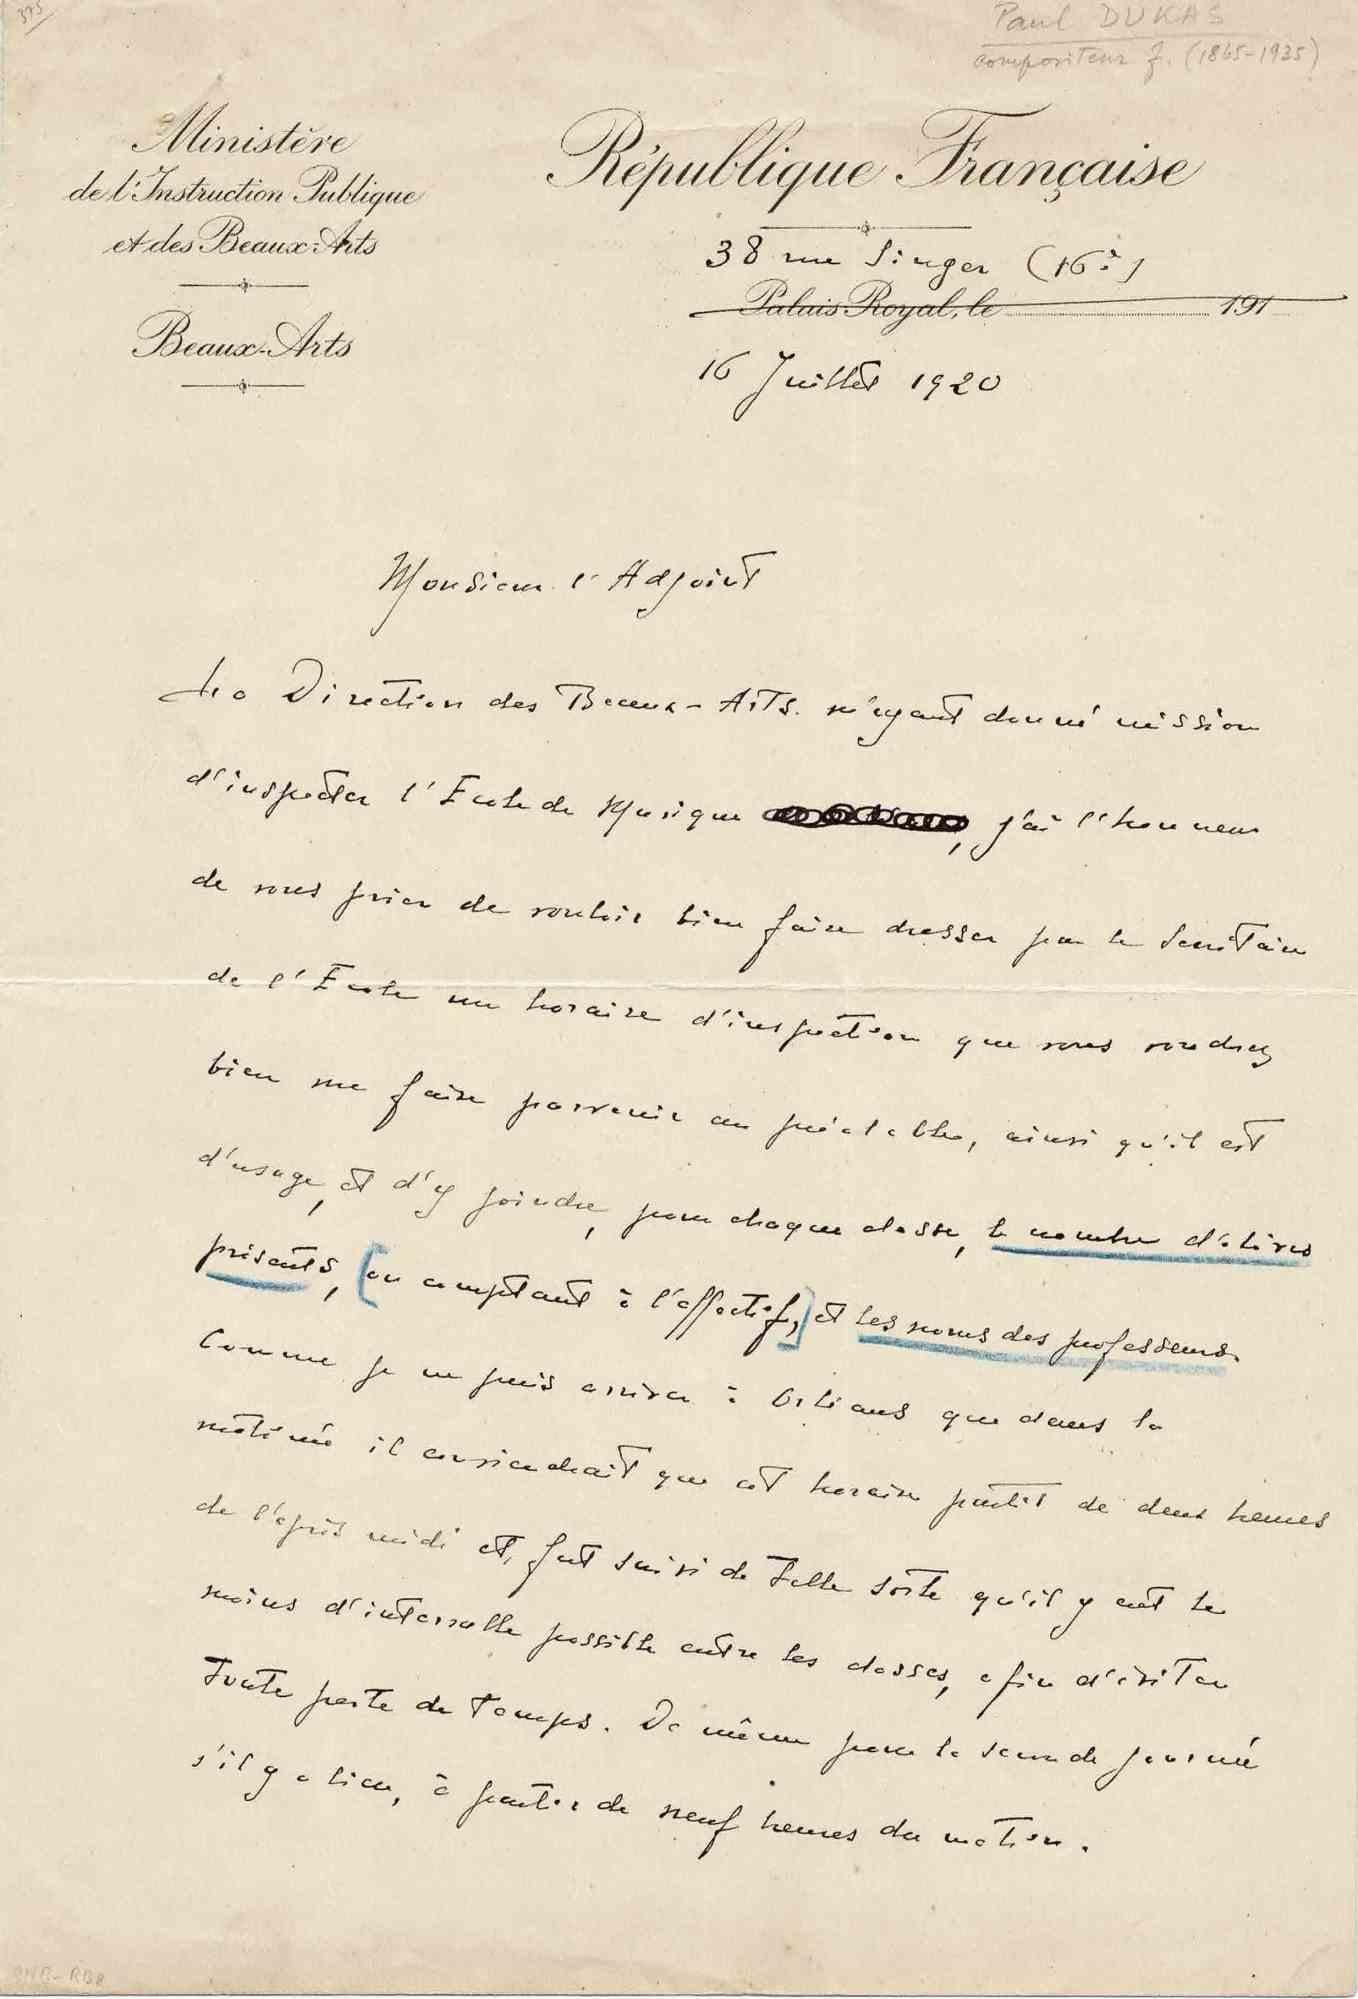 Autograph letter signed in French and dated 16 Juillet 1920 by the French composer Paul Dukas (Paris, 1865 - ib., 1935), best-known for his orchestral piece "The Sorcerer’s Apprentice" (1897).

As inspector of music teaching at the Paris